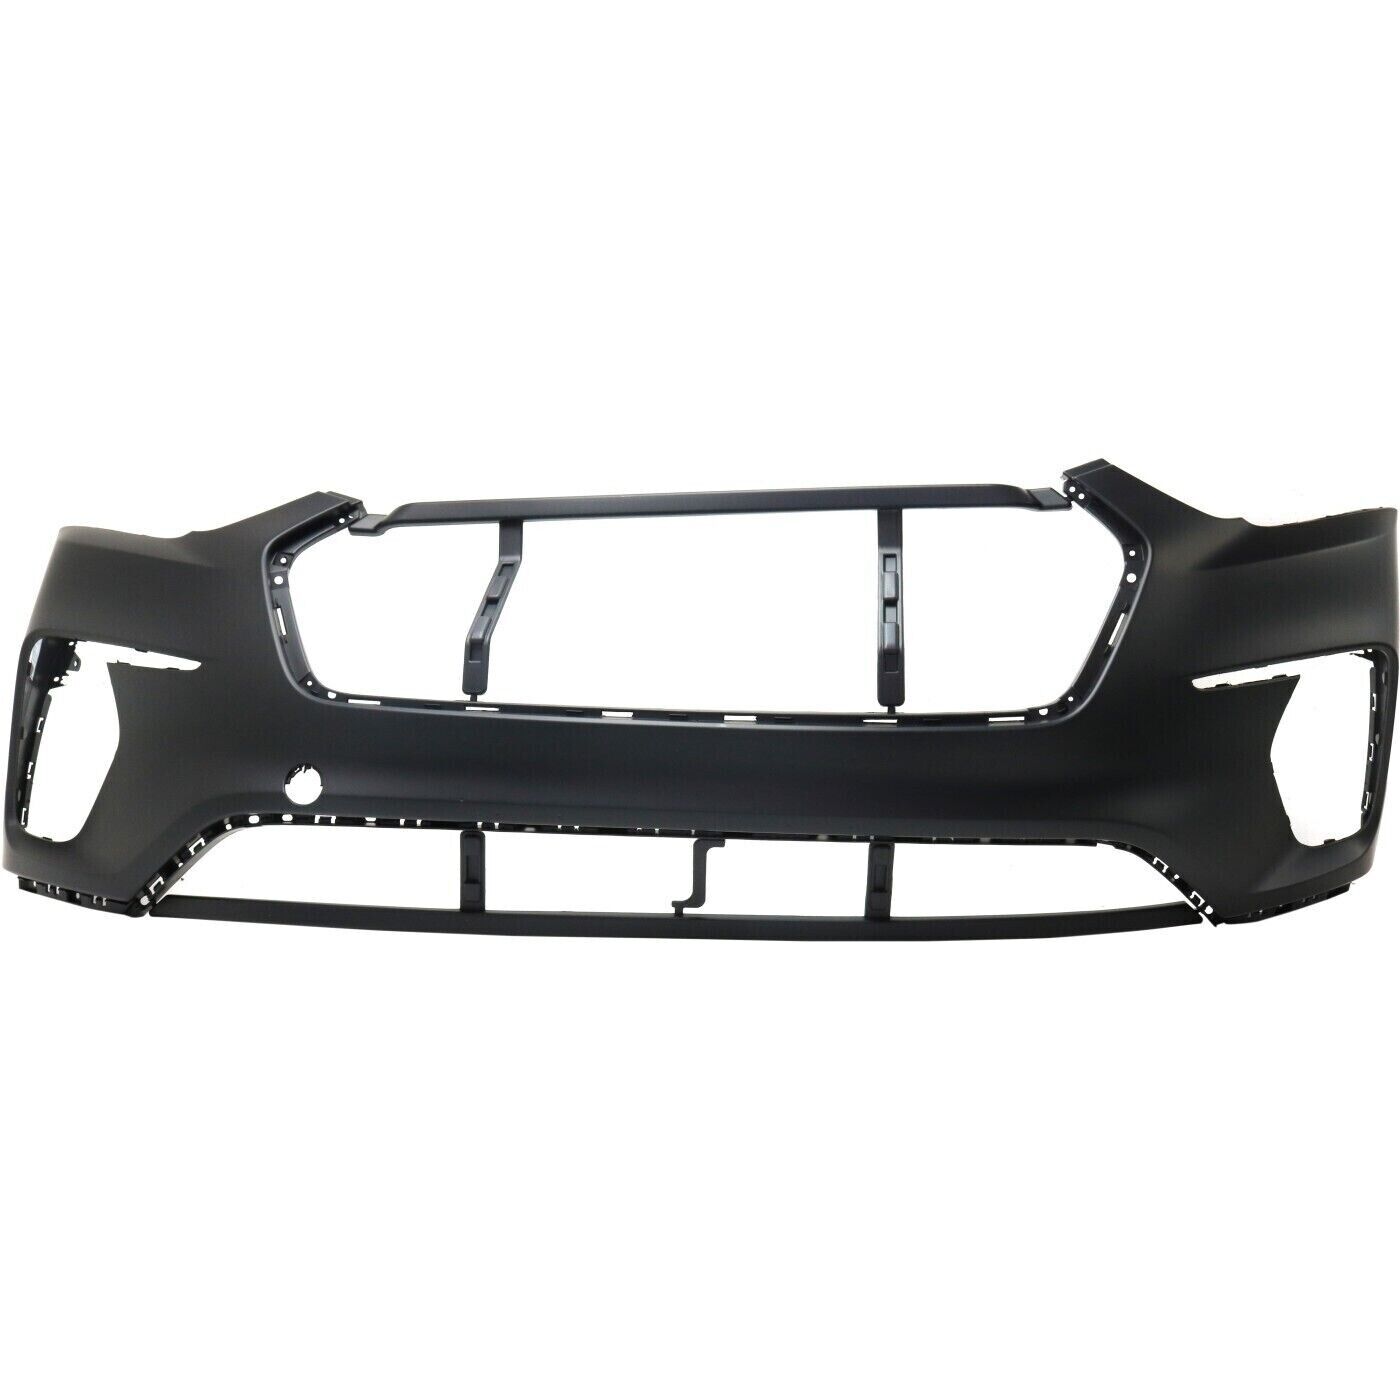 2017-2019 HYUNDAI Santa Fe; Front Bumper Cover; Exc SPORT Painted to Match